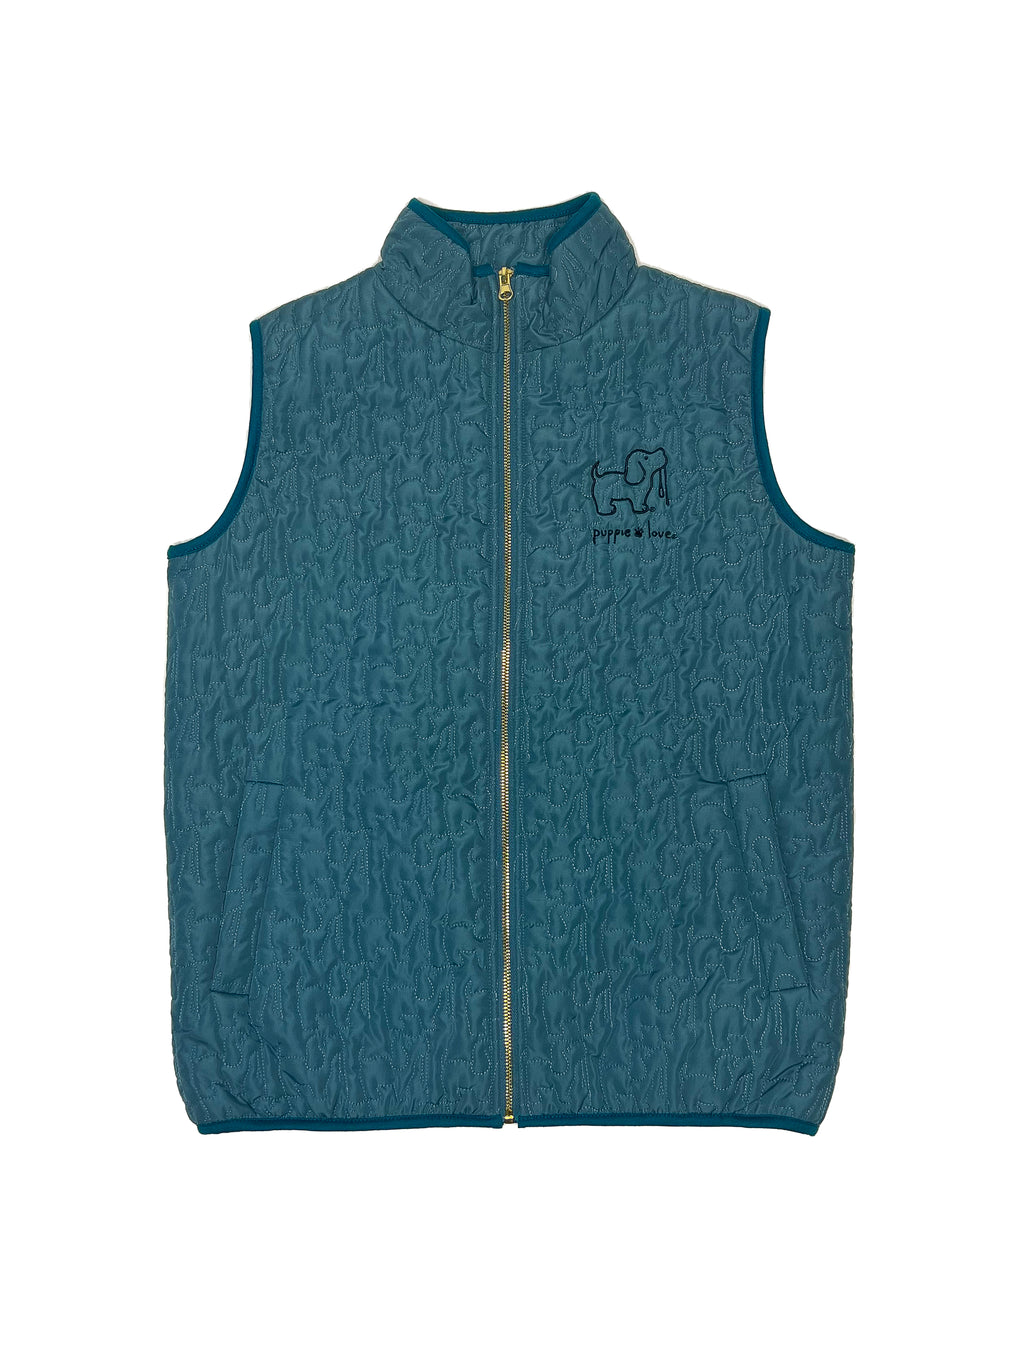 QUILTED VEST, TEAL - Puppie Love